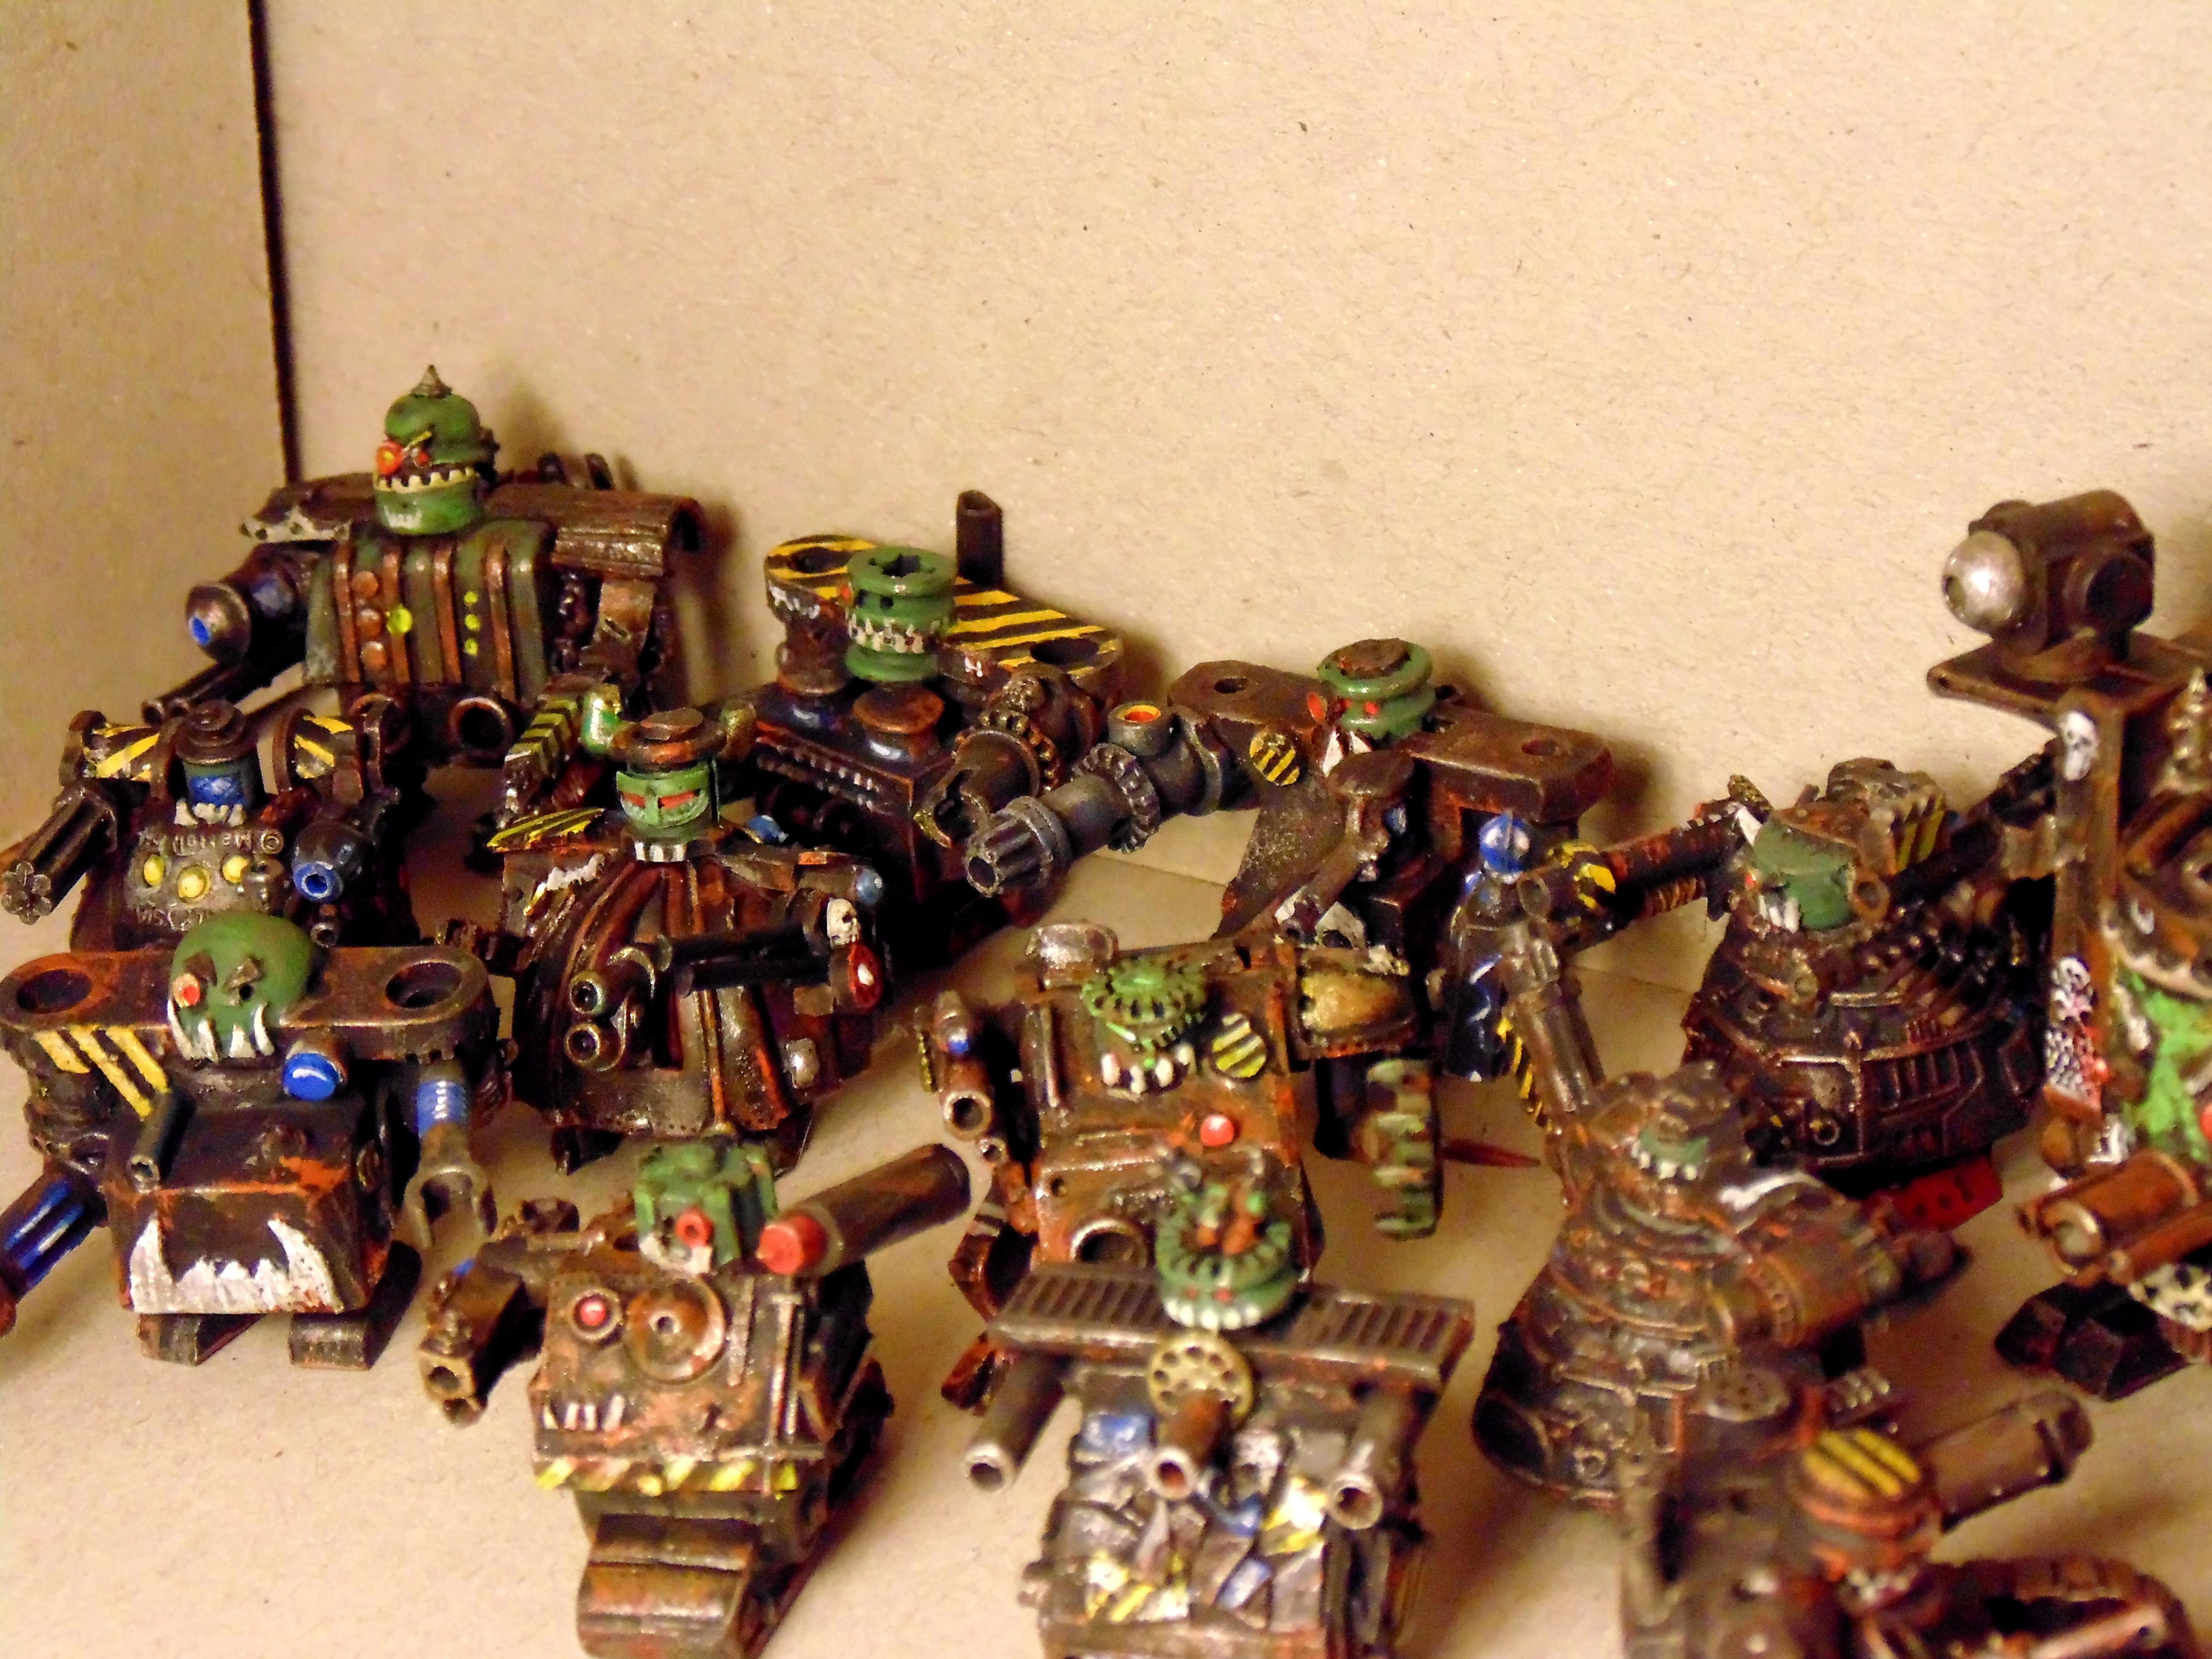 6mm, Army, Comparison, Conversion, Epic, Gargant, Green, Mob, Nob, Oldhammer, Orks, Scratch, Scratch Build, Size, Stampfa, Stompa, Superstompa, Waaagh, Warhammer 40,000